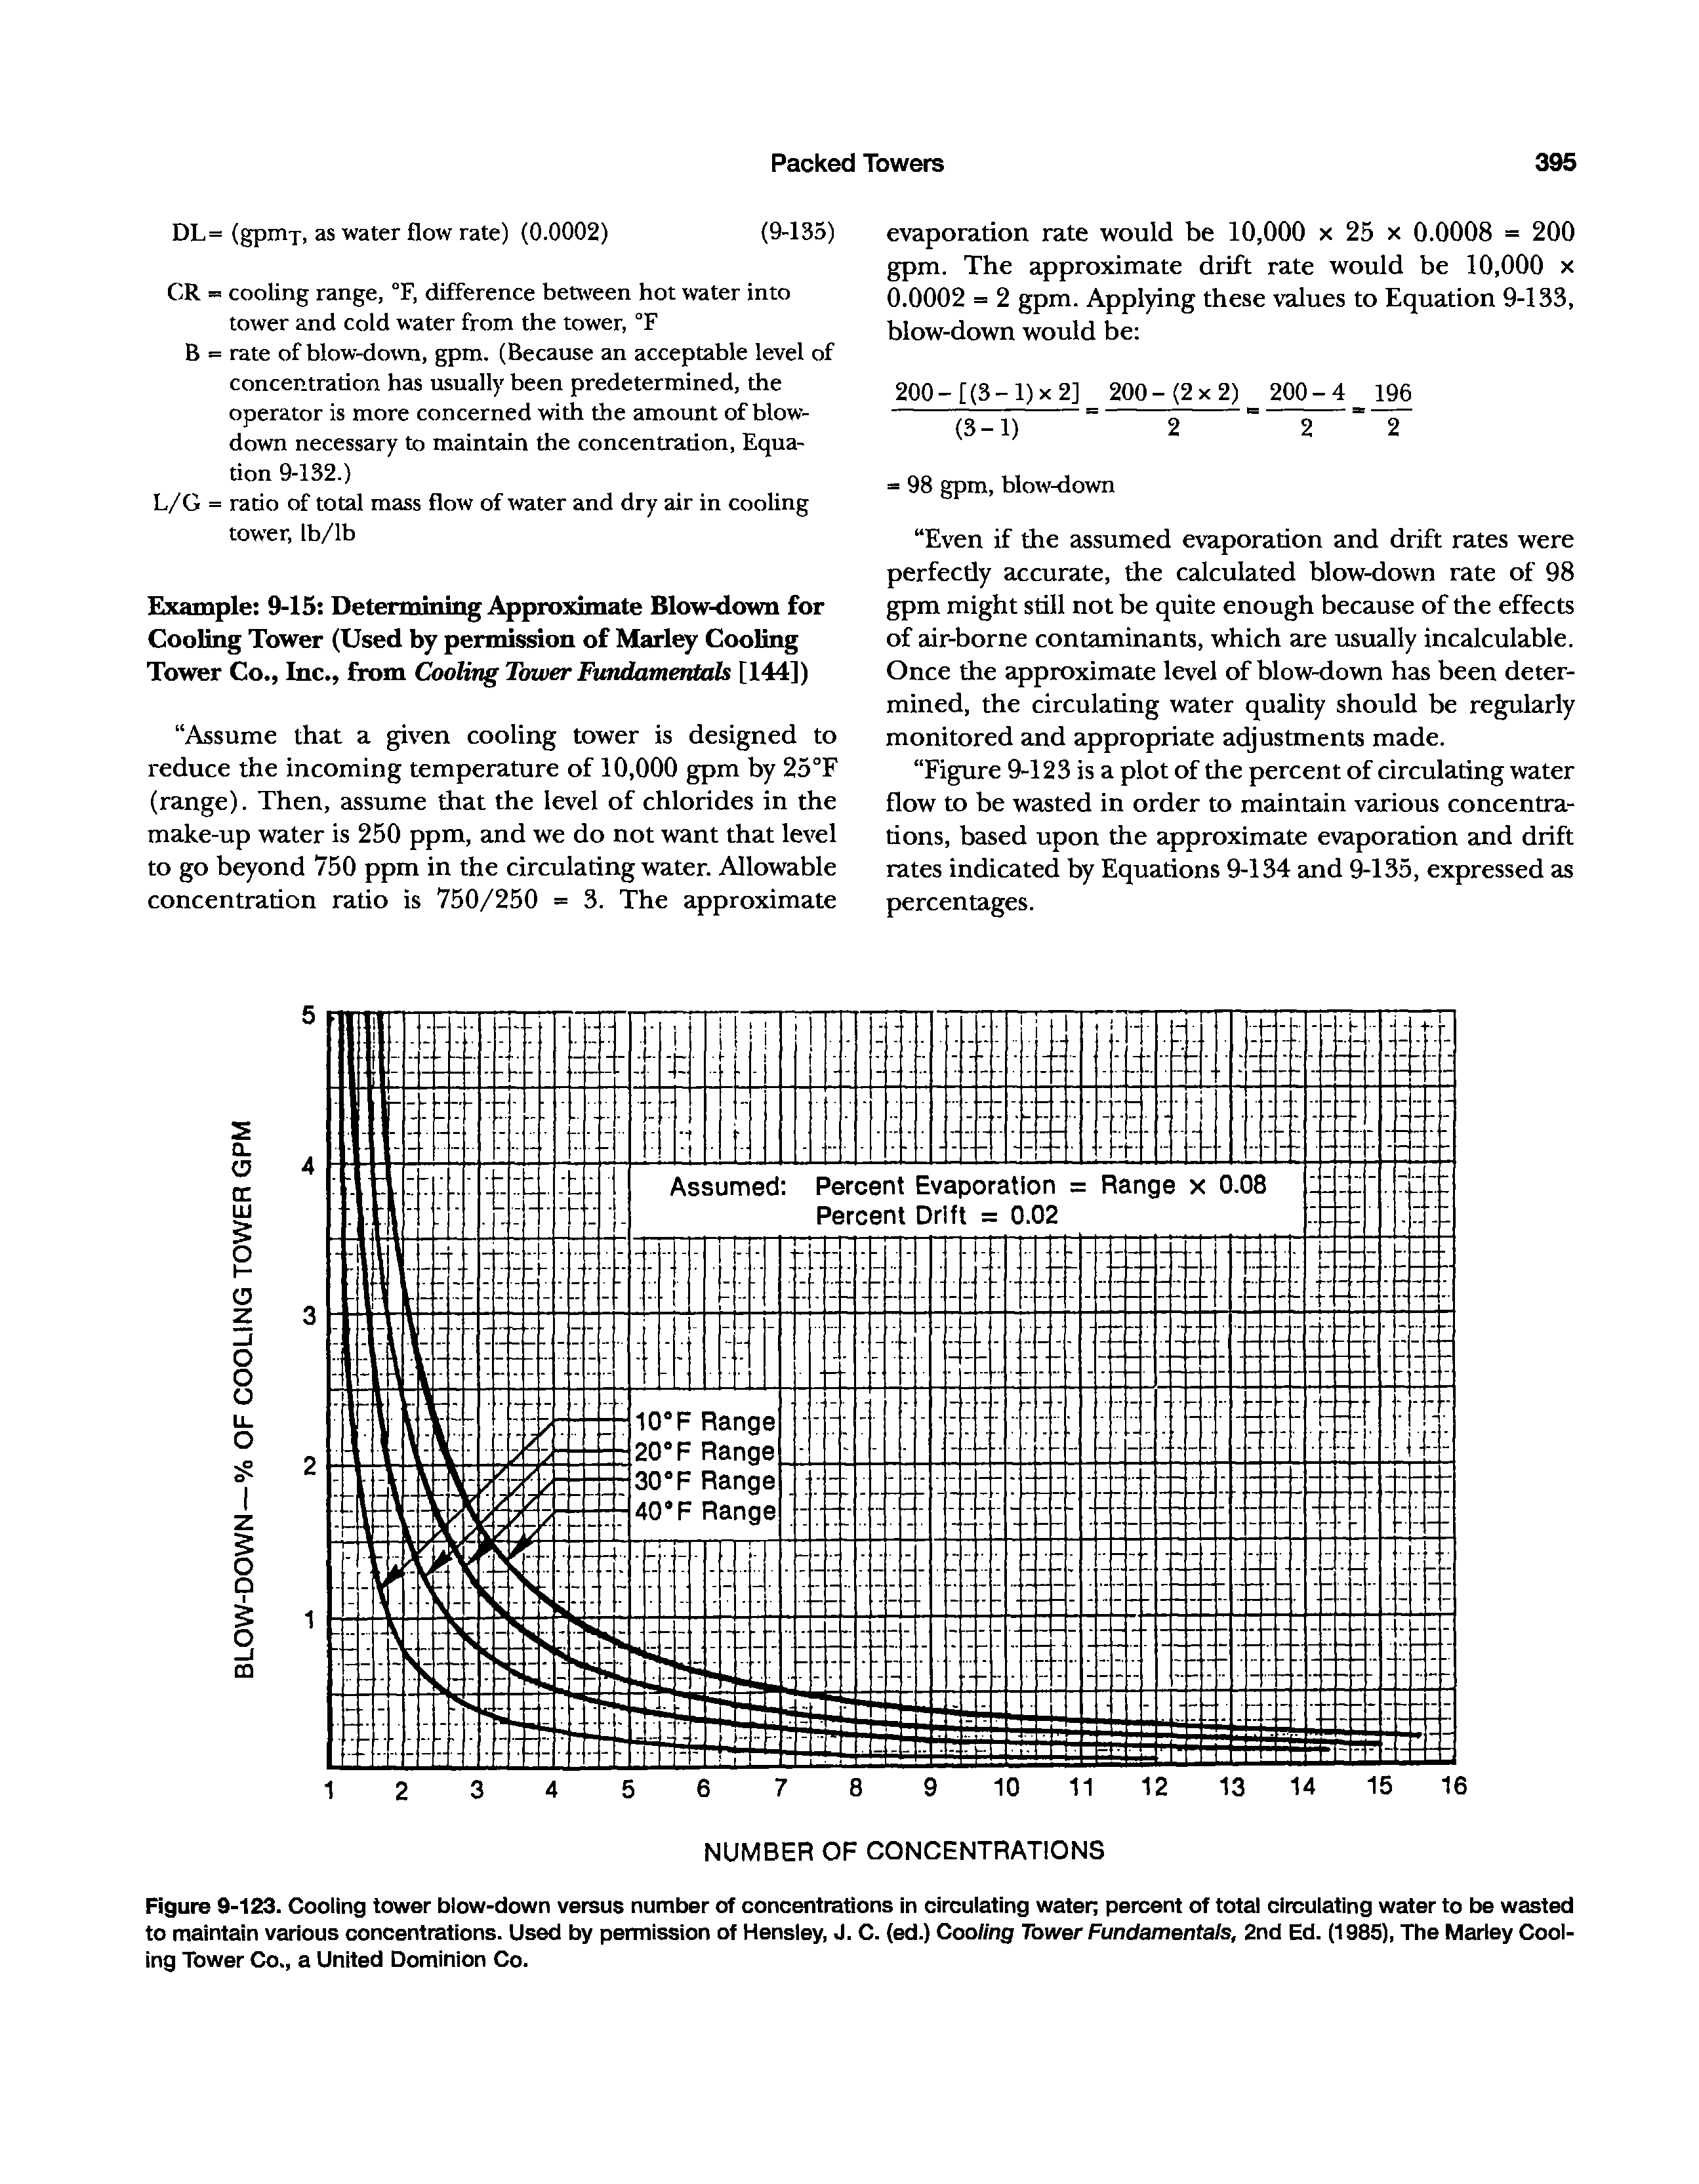 Figure 9-123. Cooling tower blow-down versus number of concentrations in circulating water percent of total circulating water to be wasted to maintain various concentrations. Used by permission of Hensley, J. C. (ed.) Cooling Tower Fundamentals, 2nd Ed. (1985), The Marley Cooling Tower Co., a United Dominion Co.